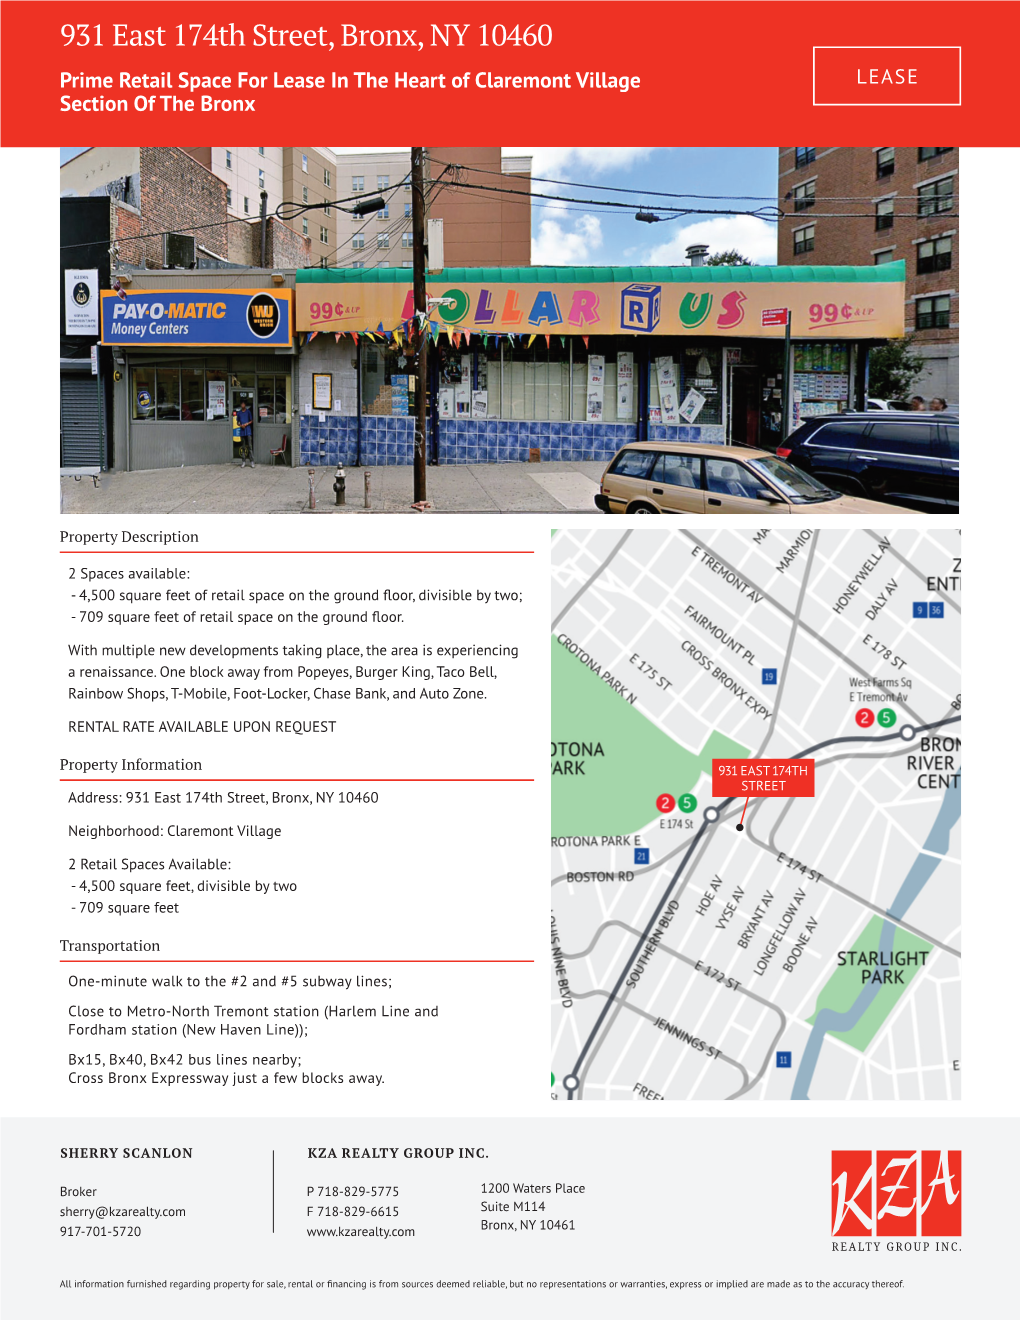 931 East 174Th Street, Bronx, NY 10460 Prime Retail Space for Lease in the Heart of Claremont Village LEASE Section of the Bronx